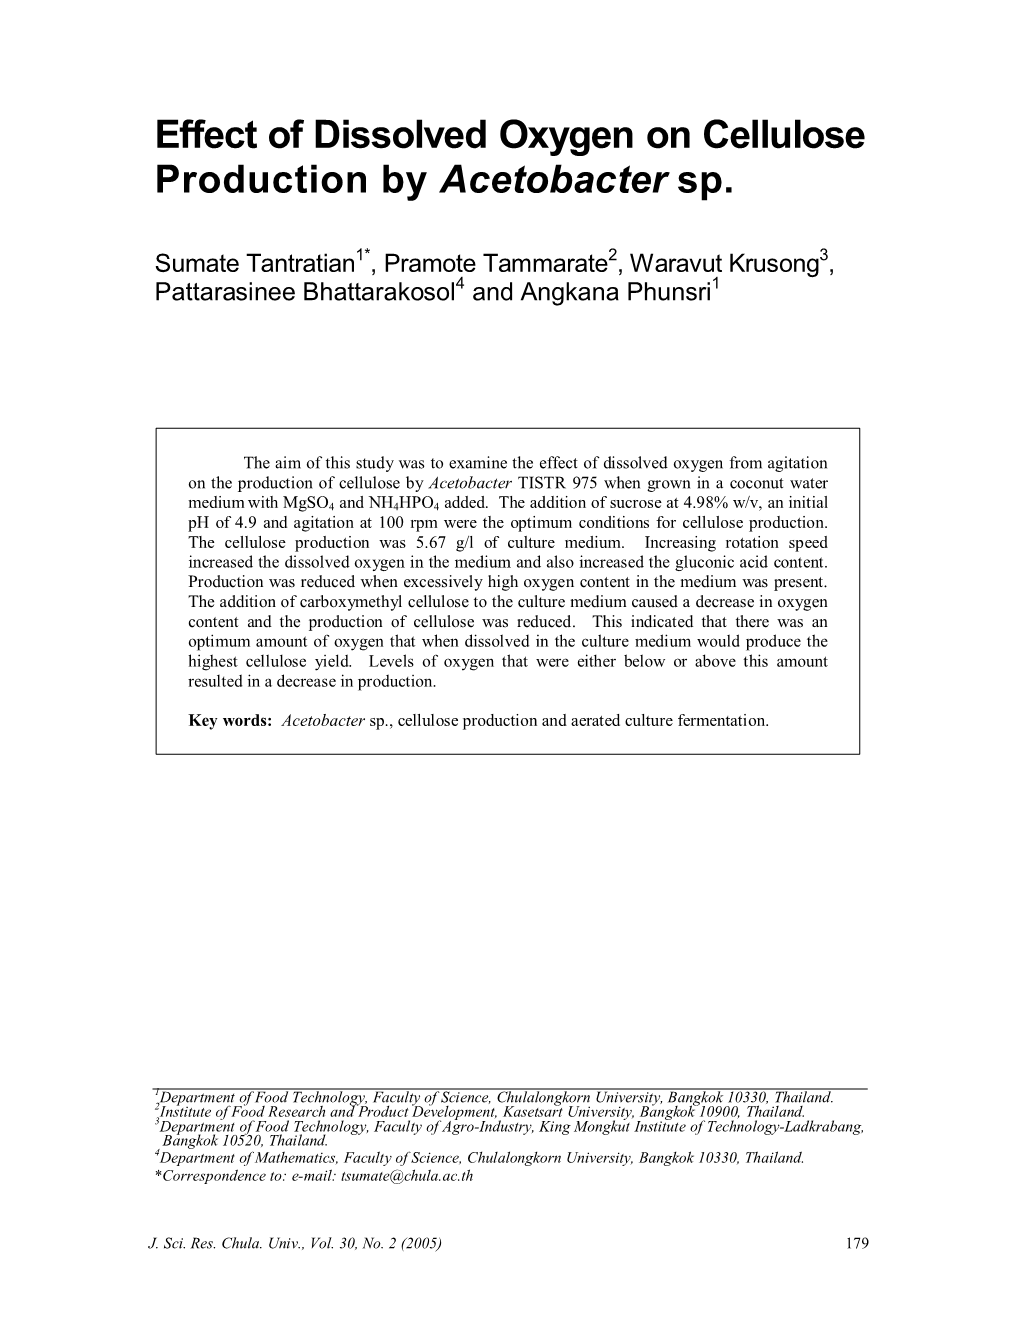 Effect of Dissolved Oxygen on Cellulose Production by Acetobacter Sp